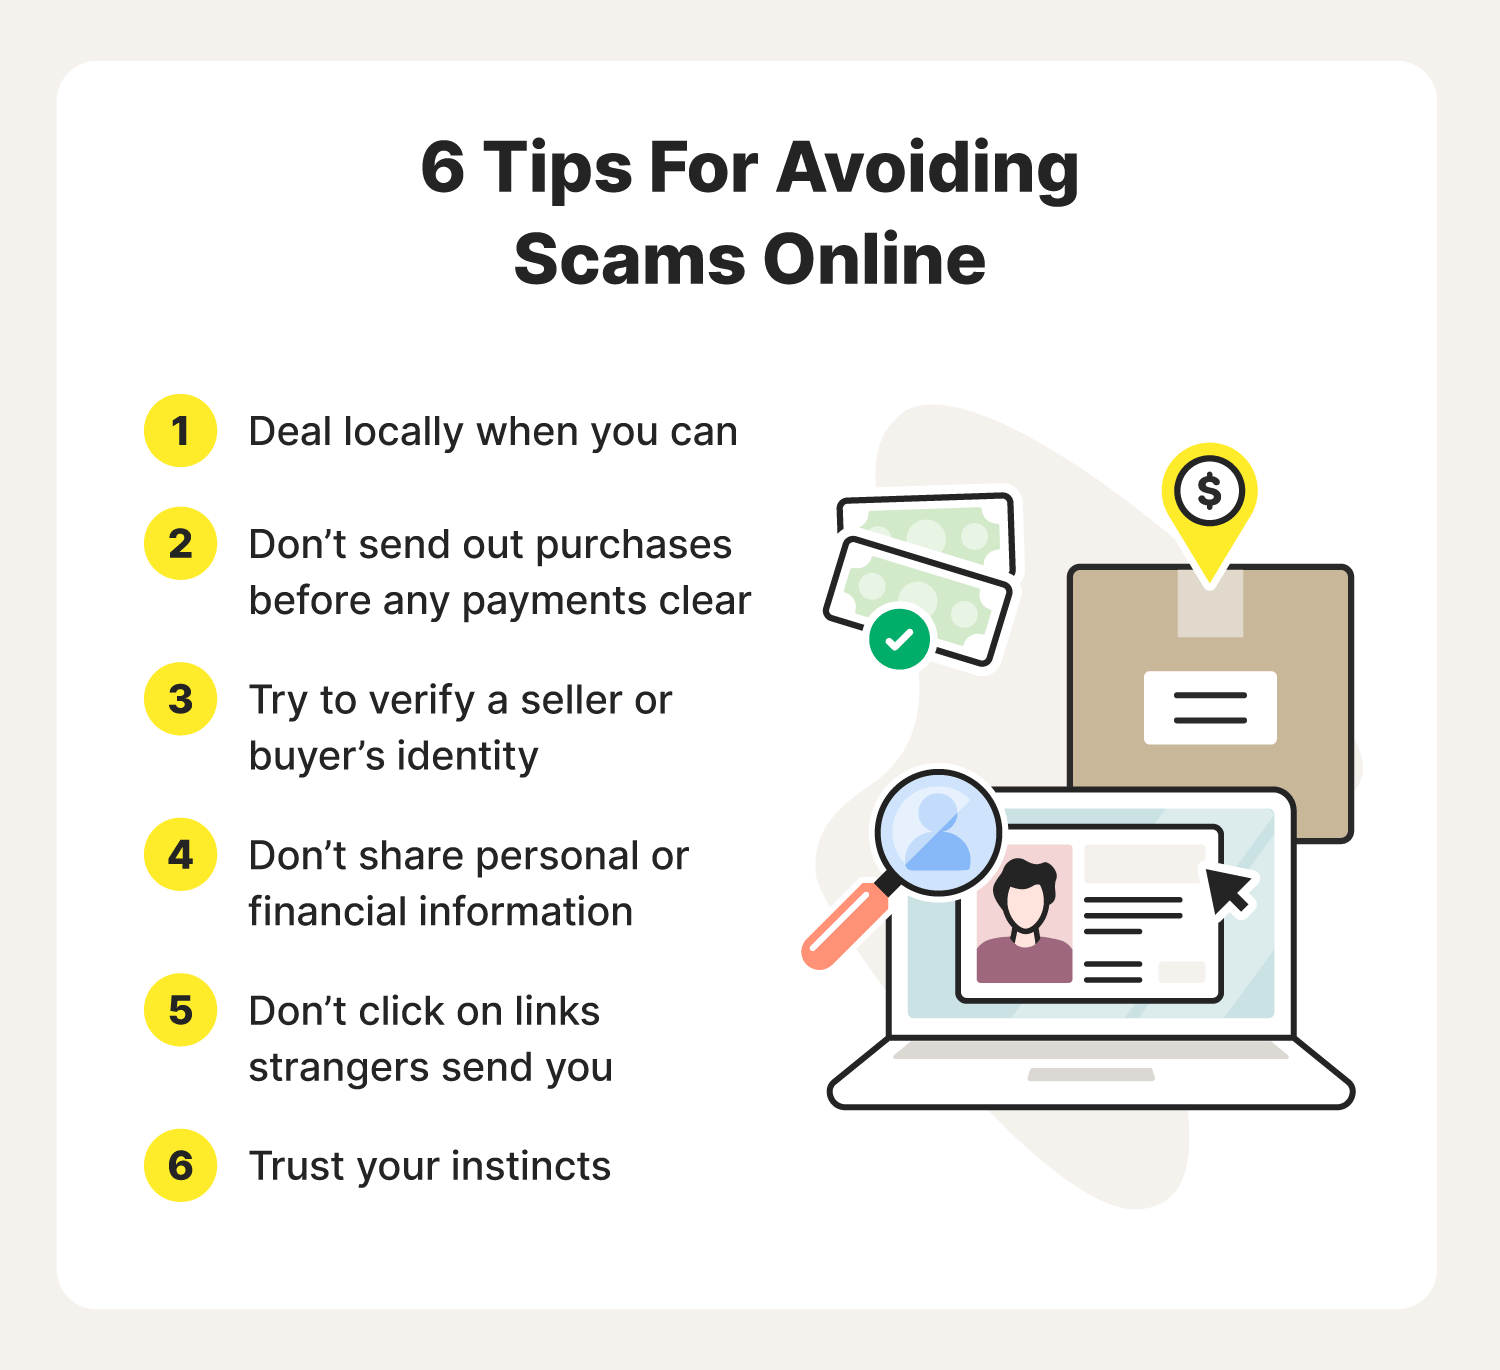 Illustrated chart with 6 tips for avoiding scams online, including dealing locally and not sharing personal information.